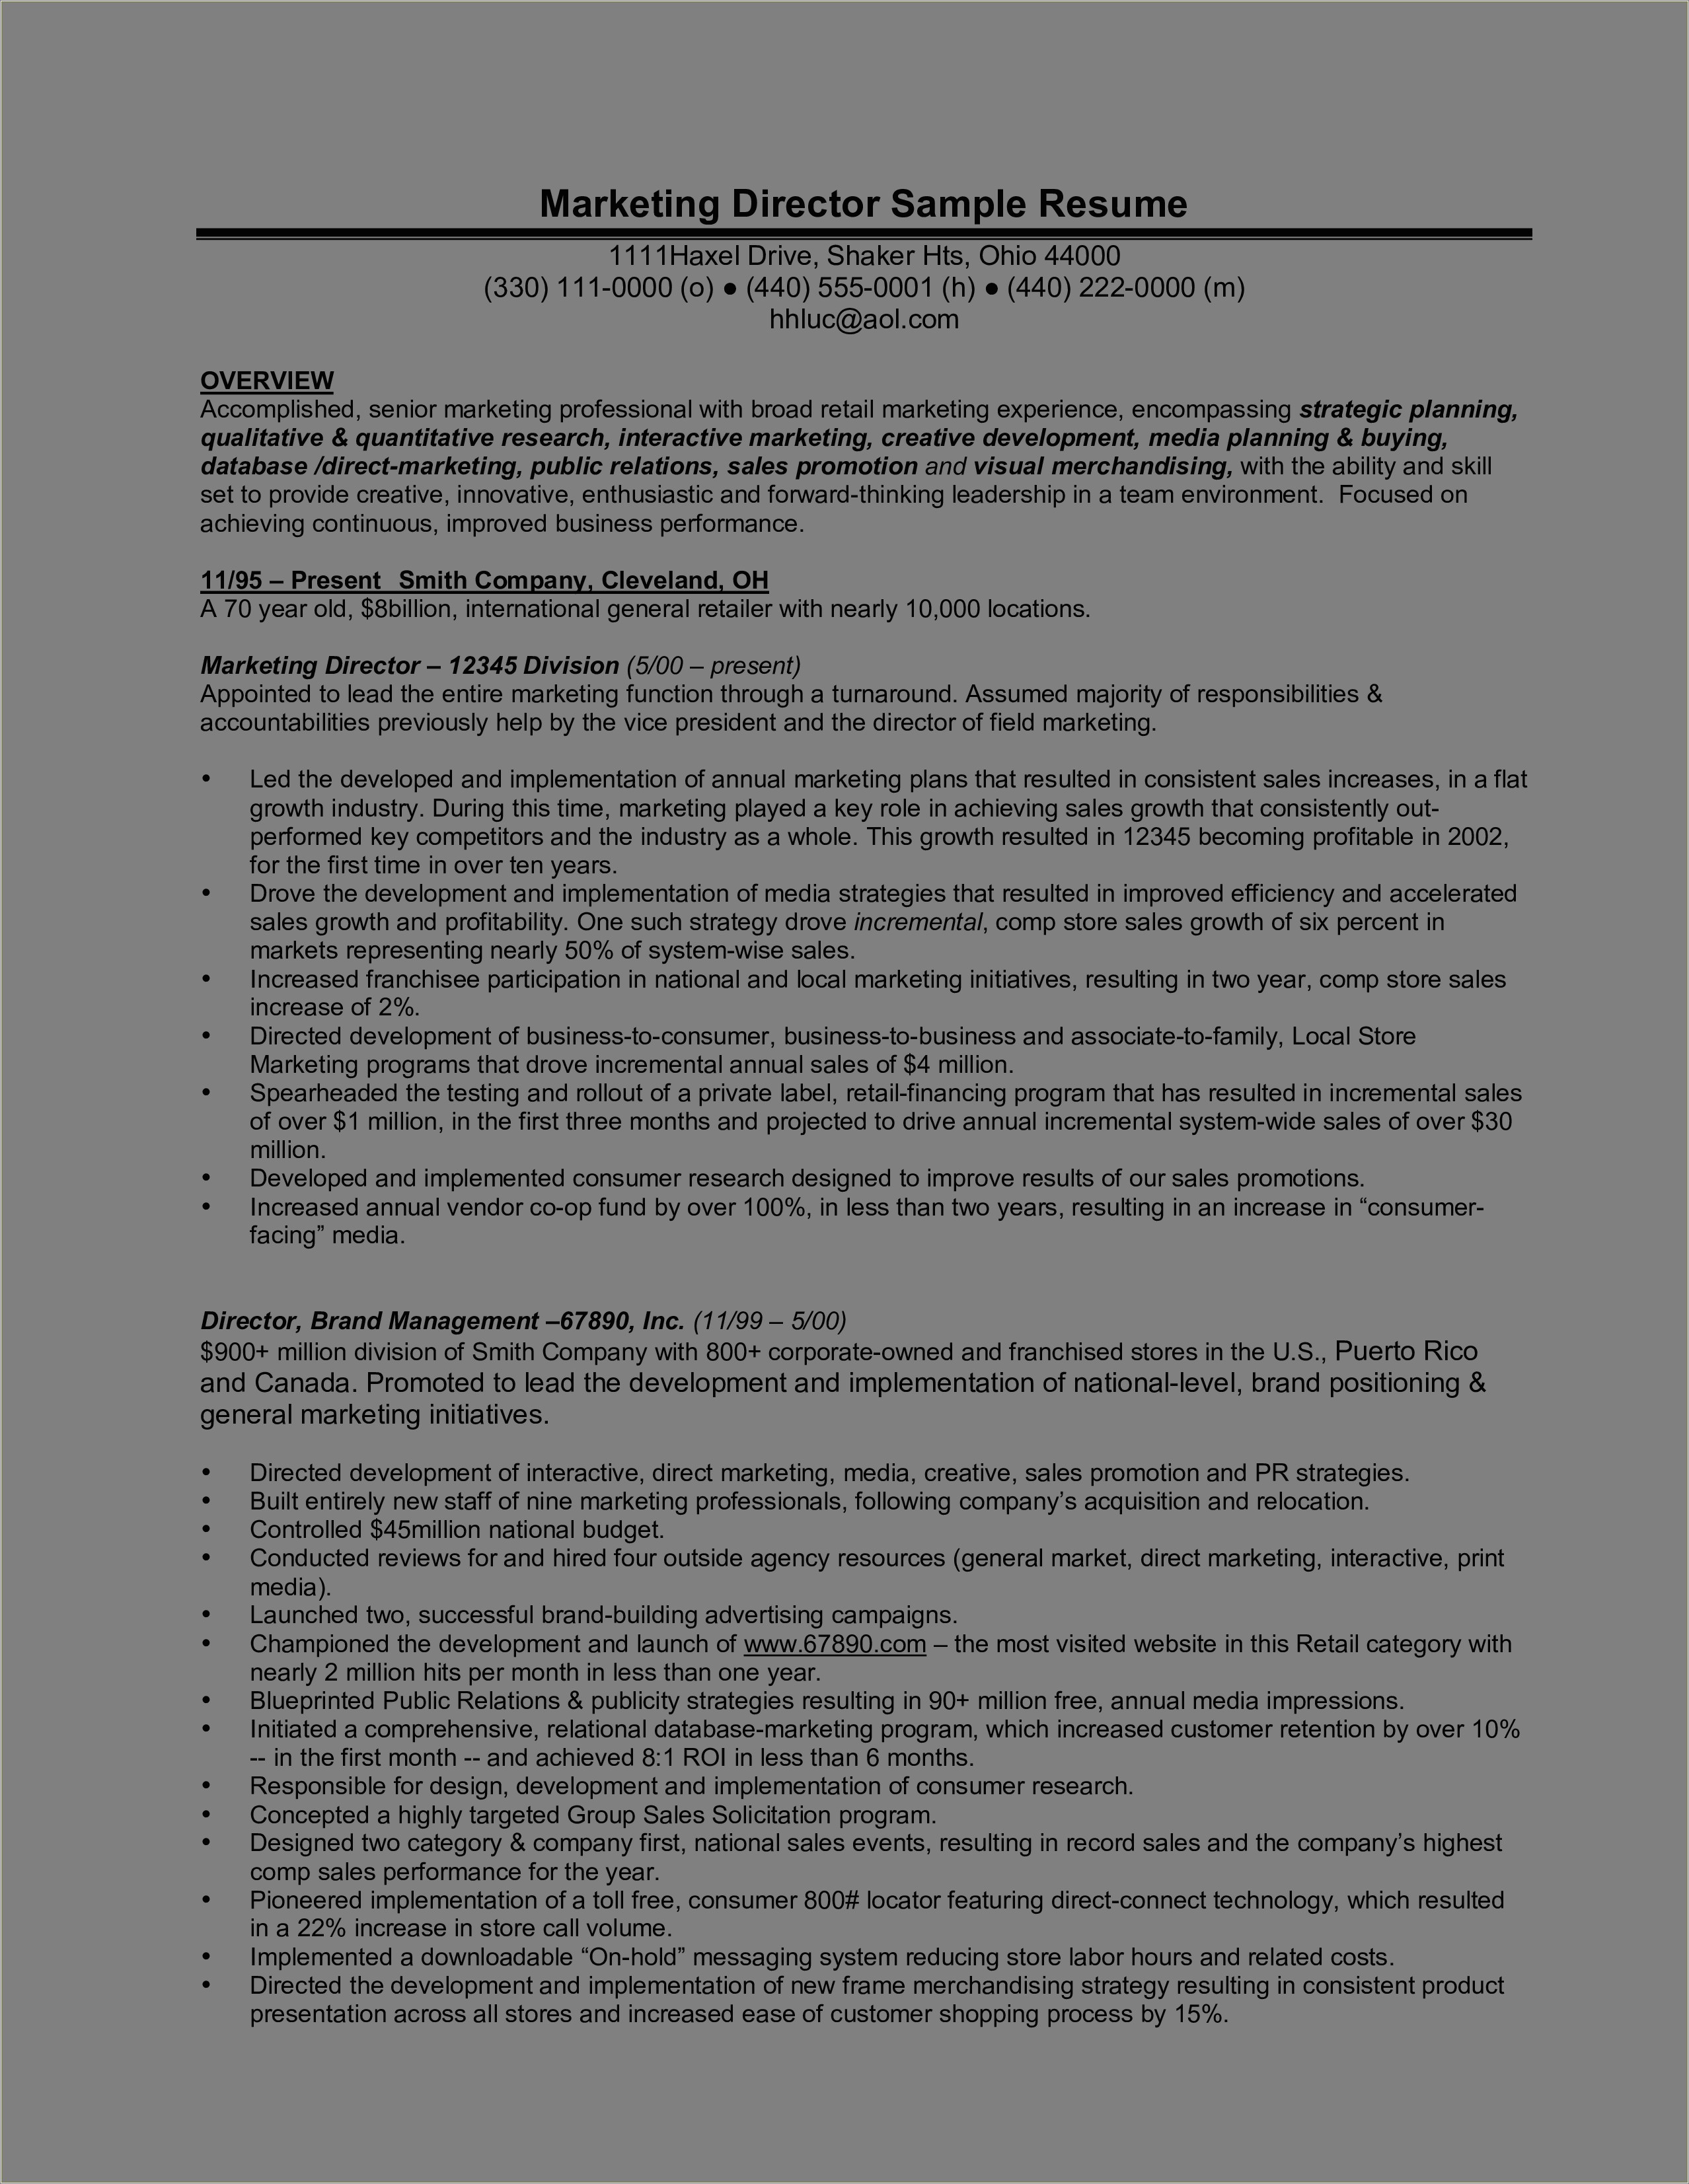 Public Relations Manager Resume Sample - Resume Example Gallery